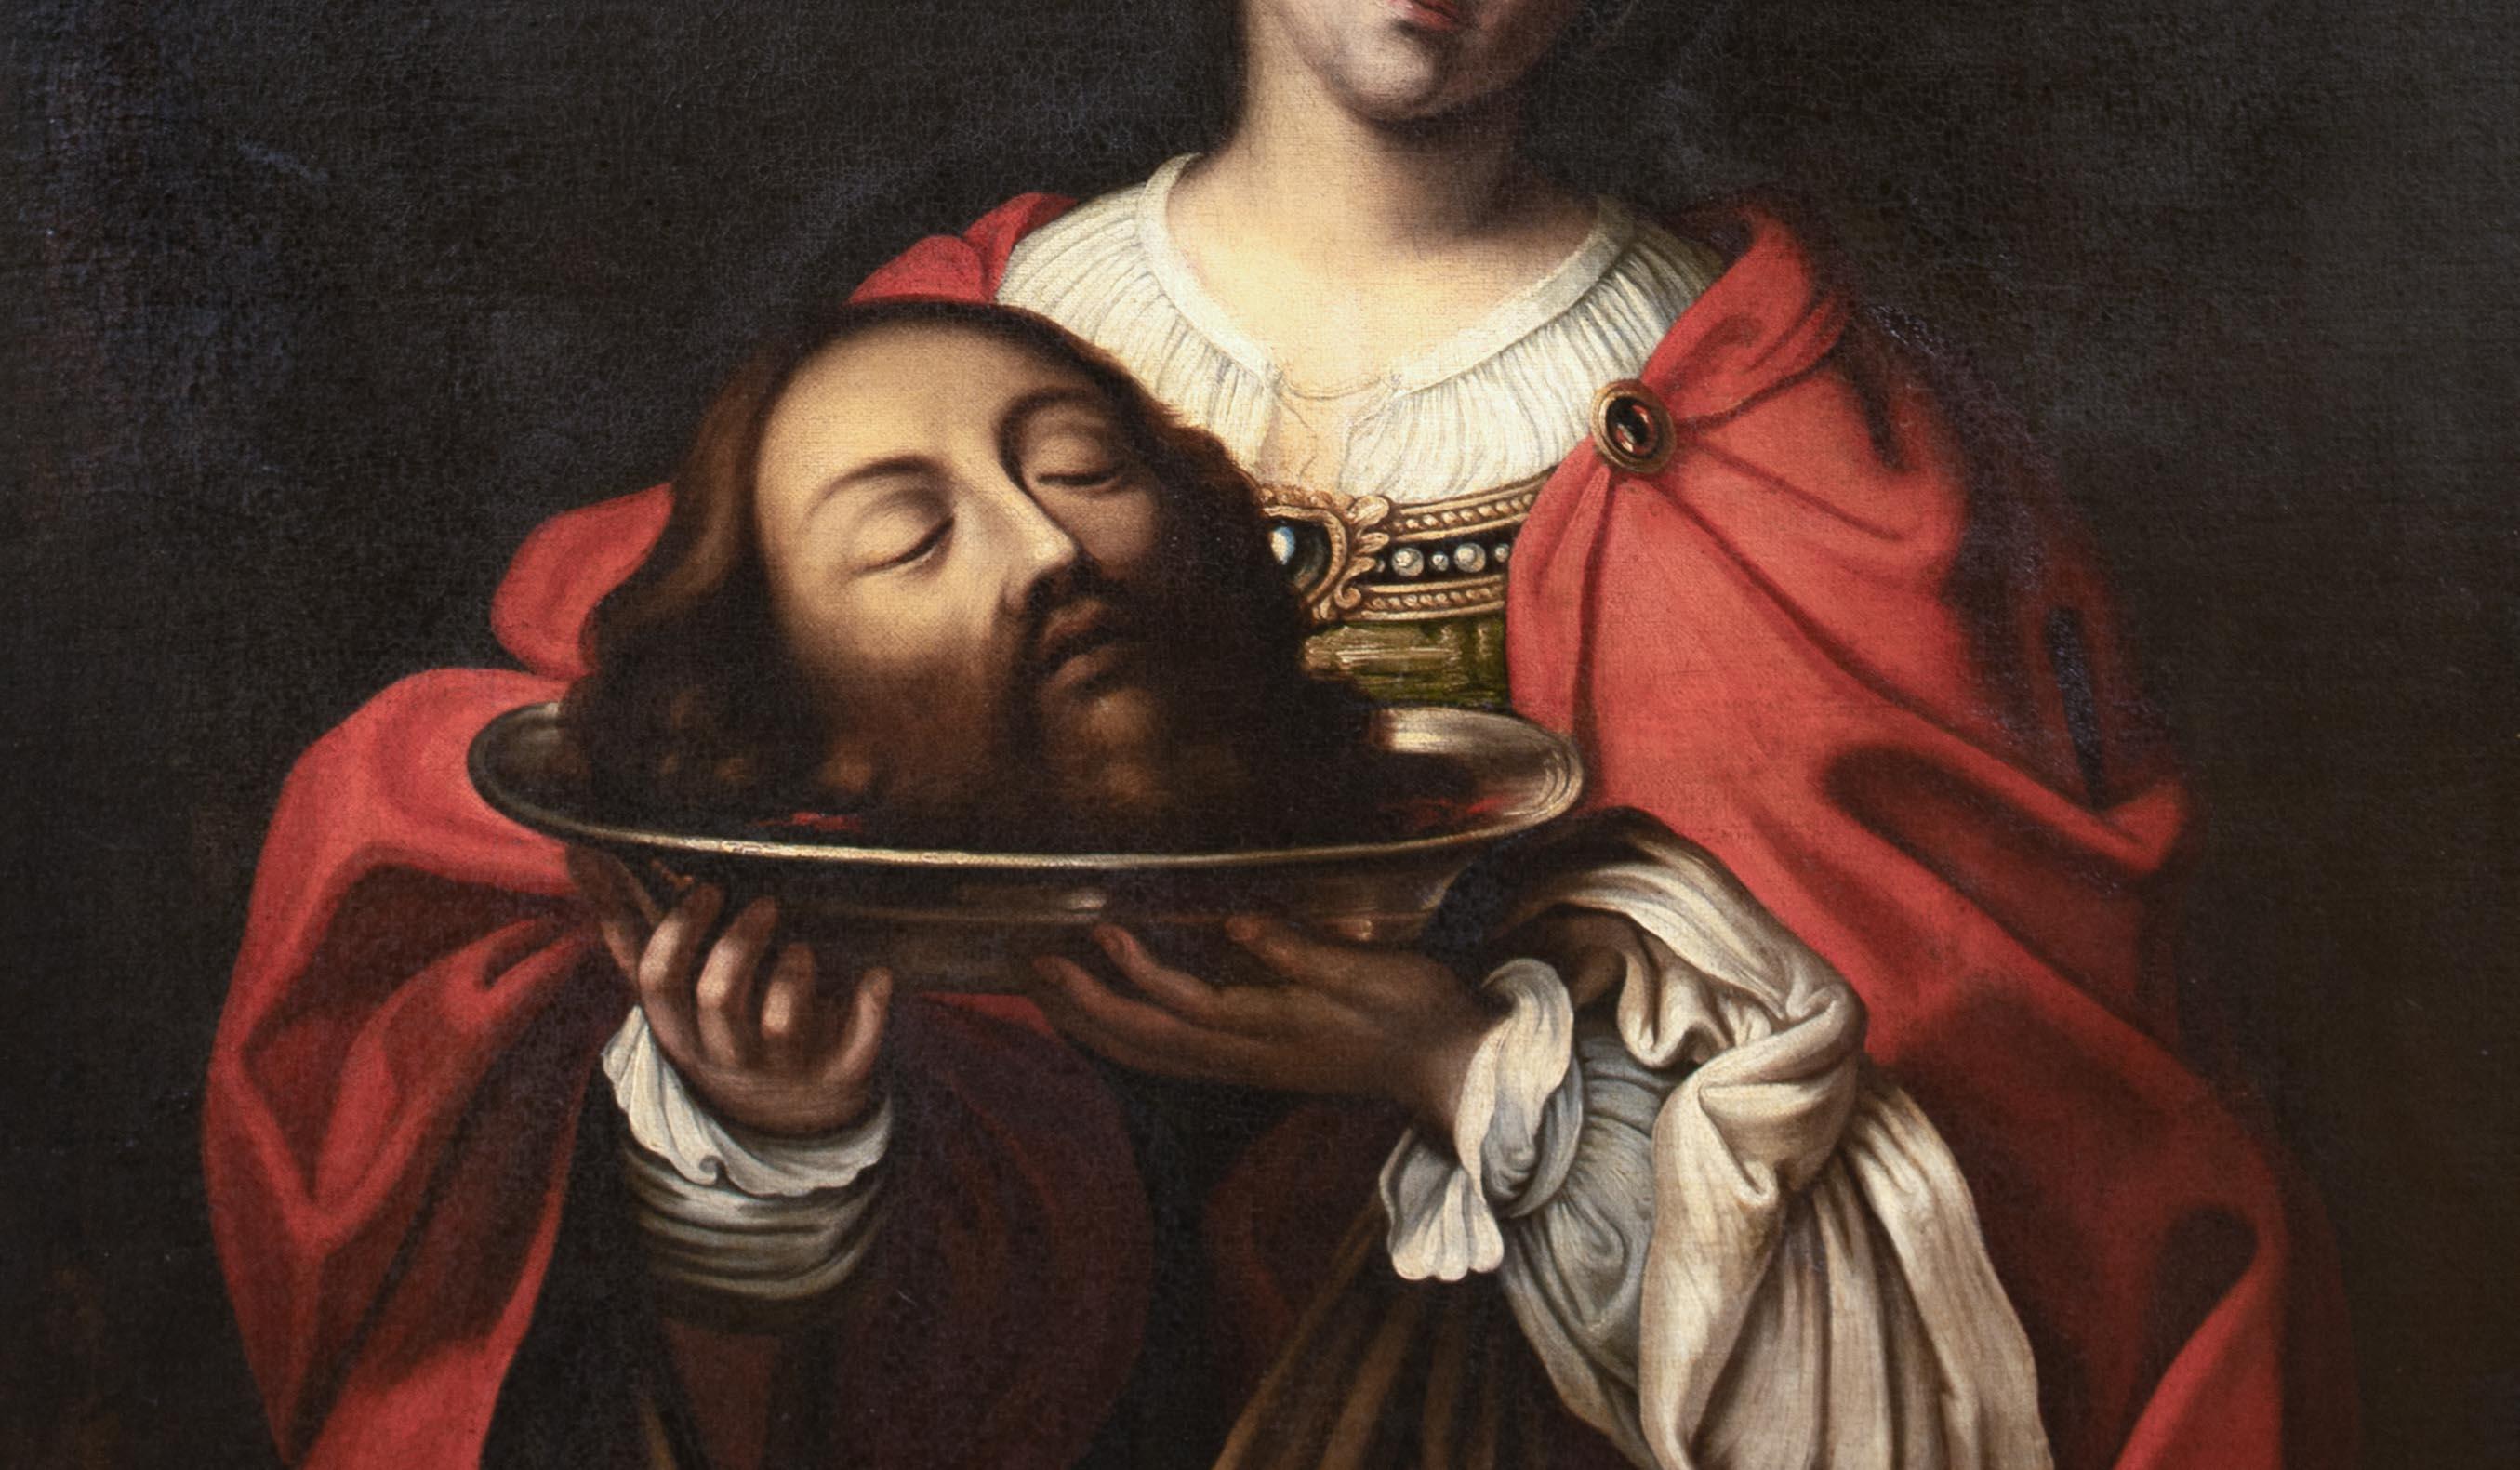 Salome With The Head Of St John The Baptist, 17th Century

Studio of GUIDO RENI (1575-1642)

Huge 17th Century Italian Old Master depiction of Salome with the head of St John The Baptist, oil on canvas. Excellent quality and condition three quarter